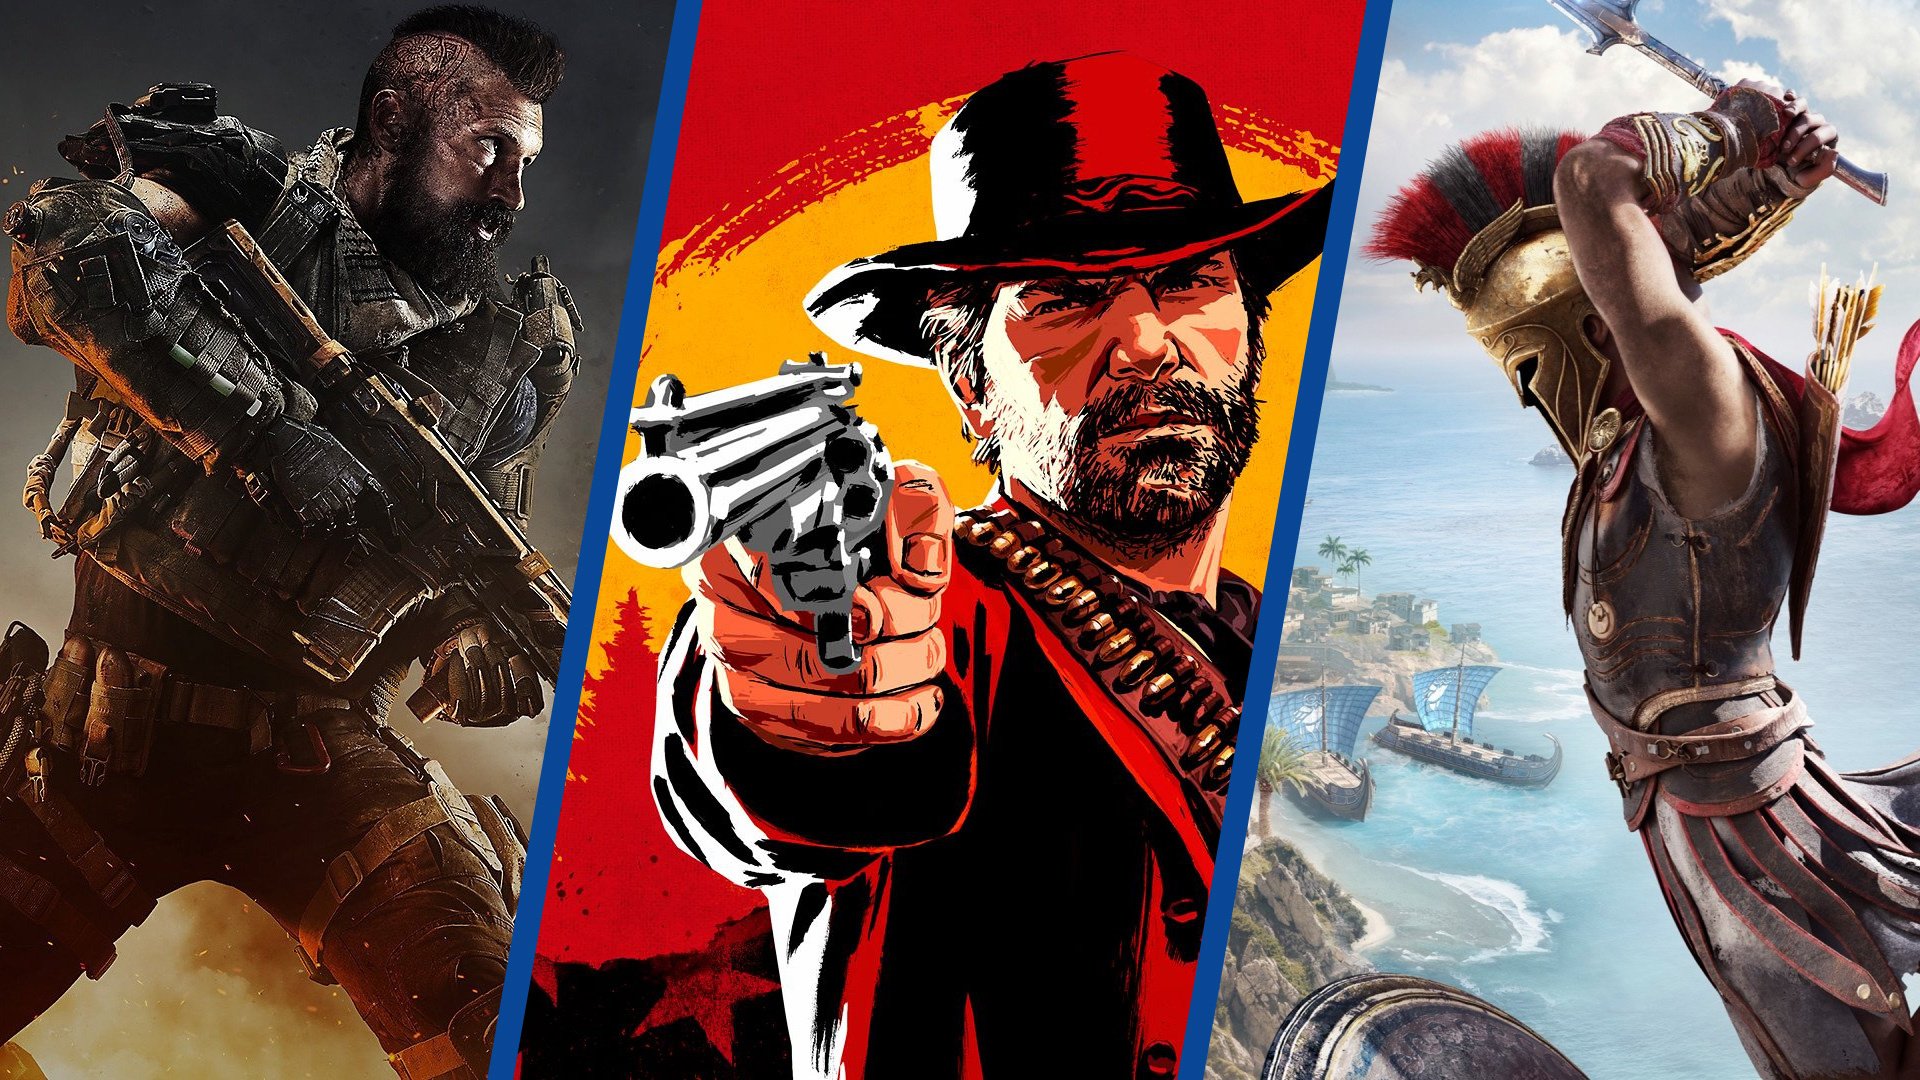 new ps4 games coming out this month